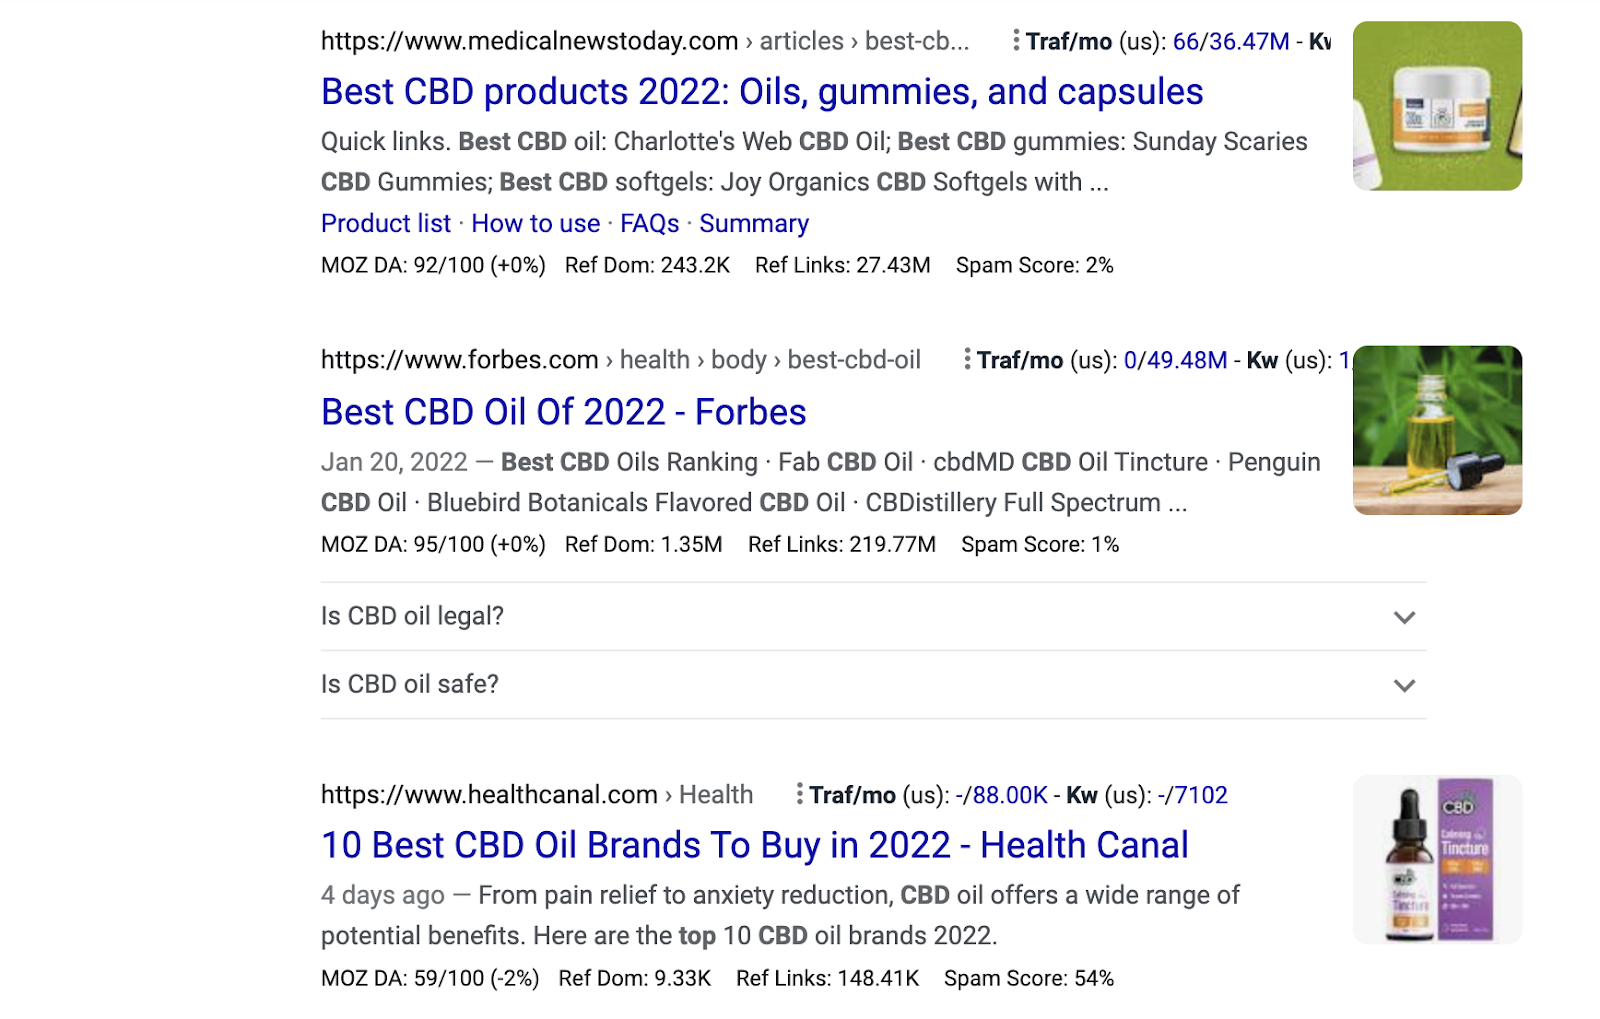 cbd search results in google displaying many best list posts